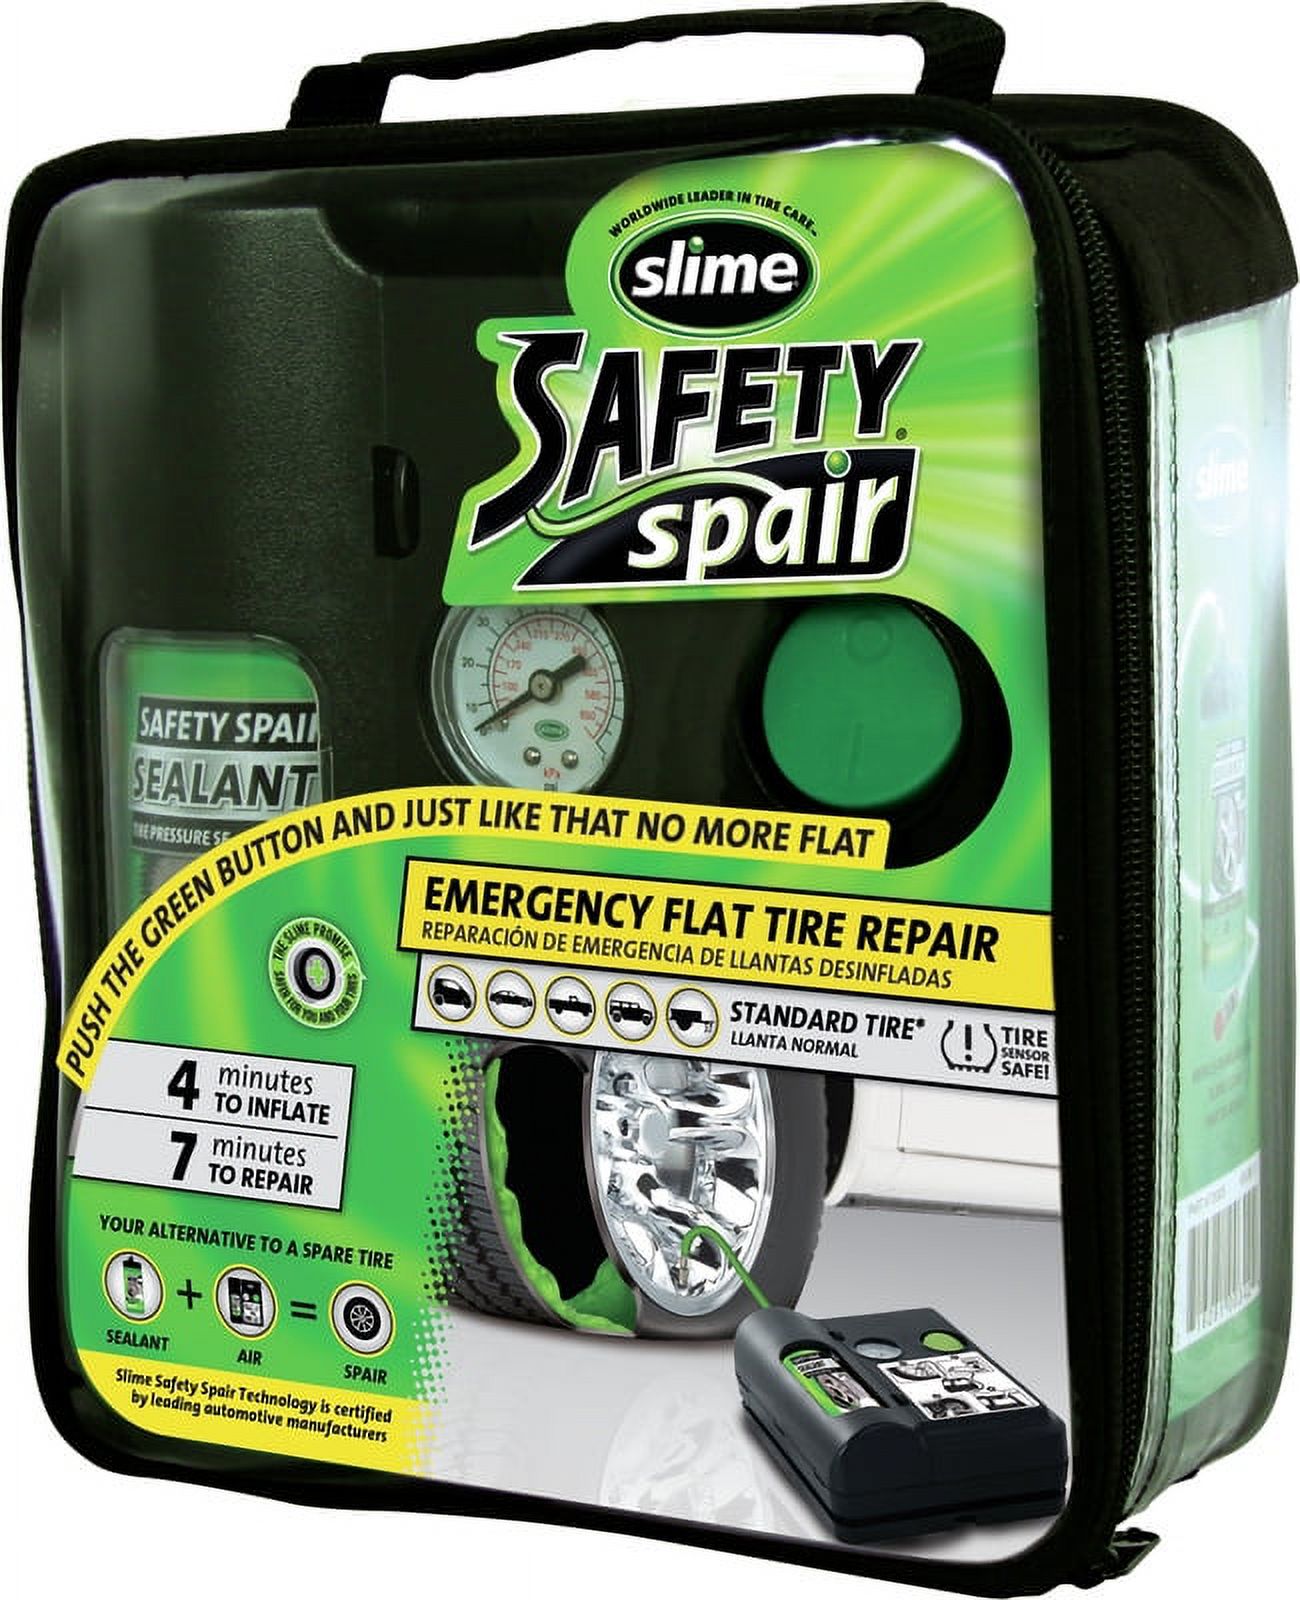 Slime-Safety Safety Spair System - 70005 - image 5 of 6